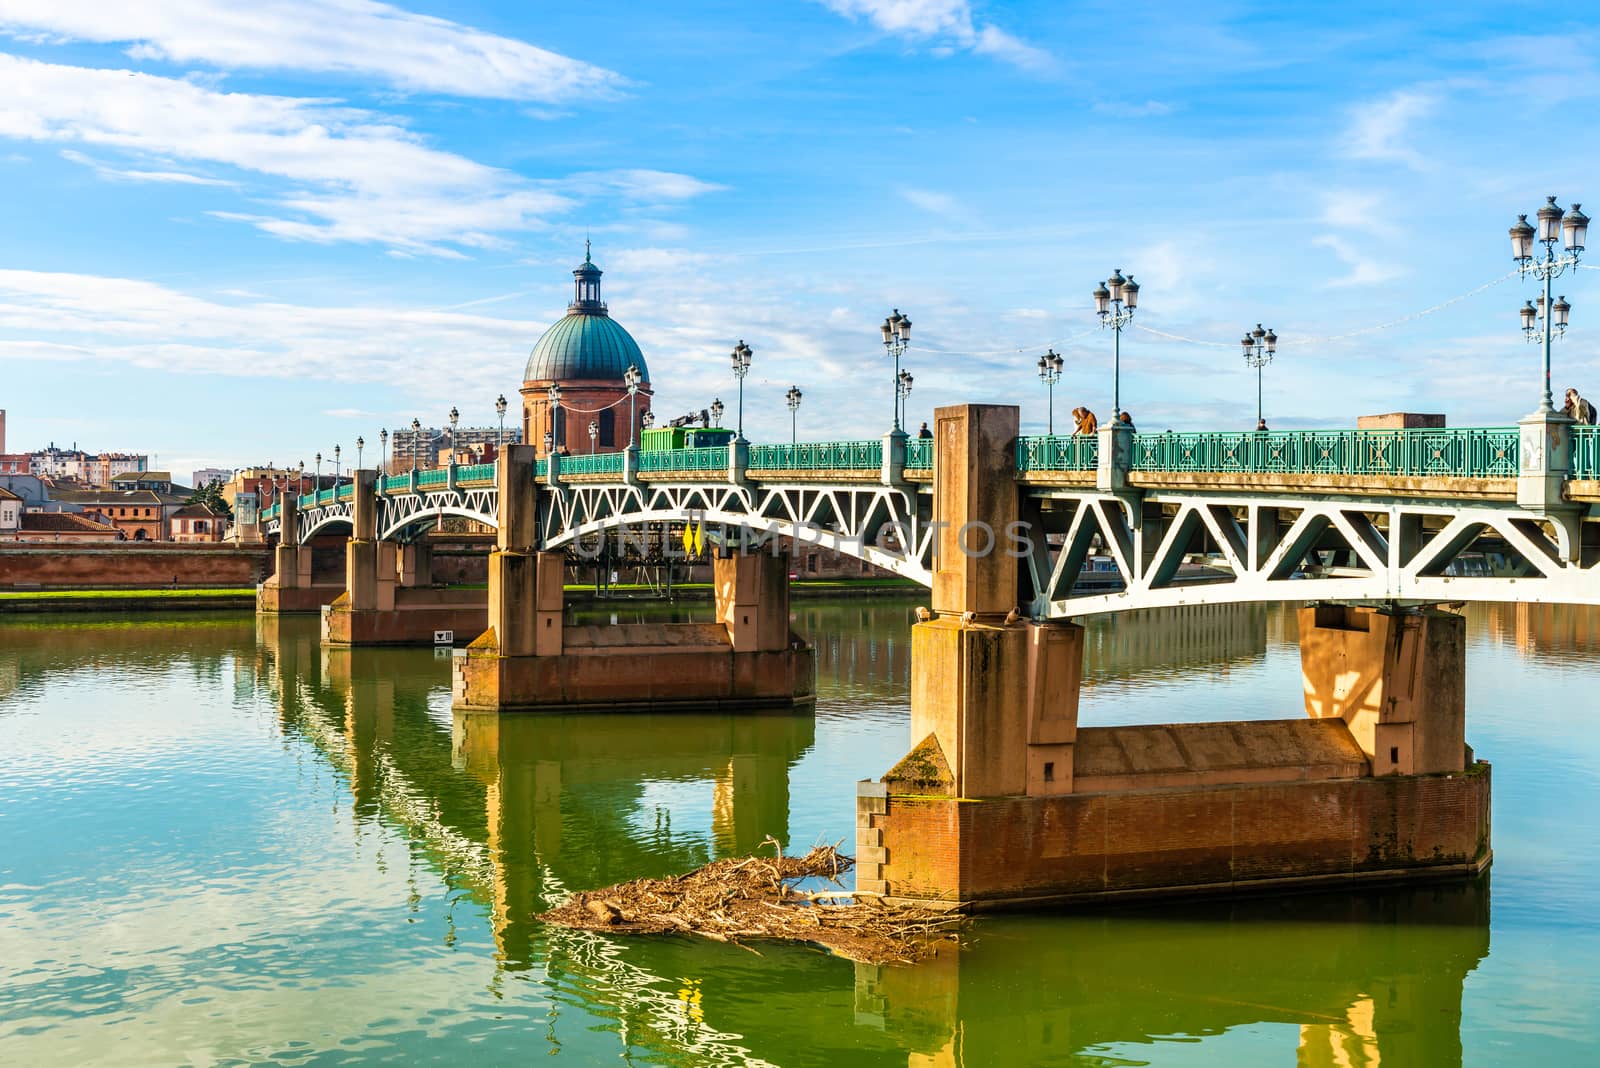 The Saint-Pierre bridge in Toulouse passes over the Garonne and connects the Place Saint-Pierre to the hospice de la Grave. It is a bridge with a metal deck, entirely rebuilt in 1987.